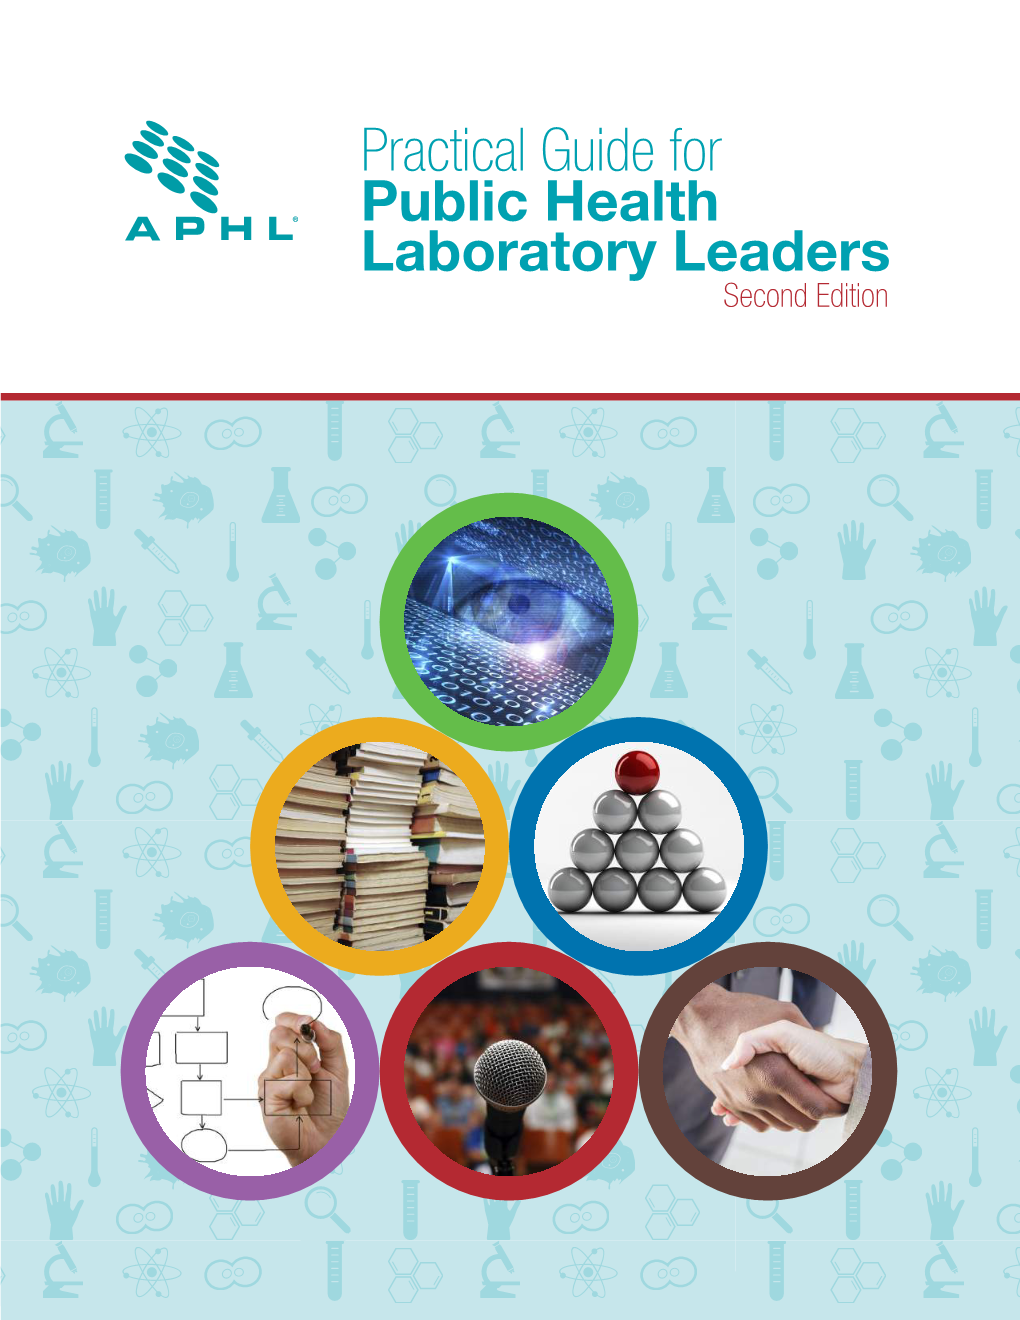 Practical Guide for Public Health Laboratory Leaders Second Edition This Project Was 100% Funded with Federal Funds from a Federal Program of $1,150,423